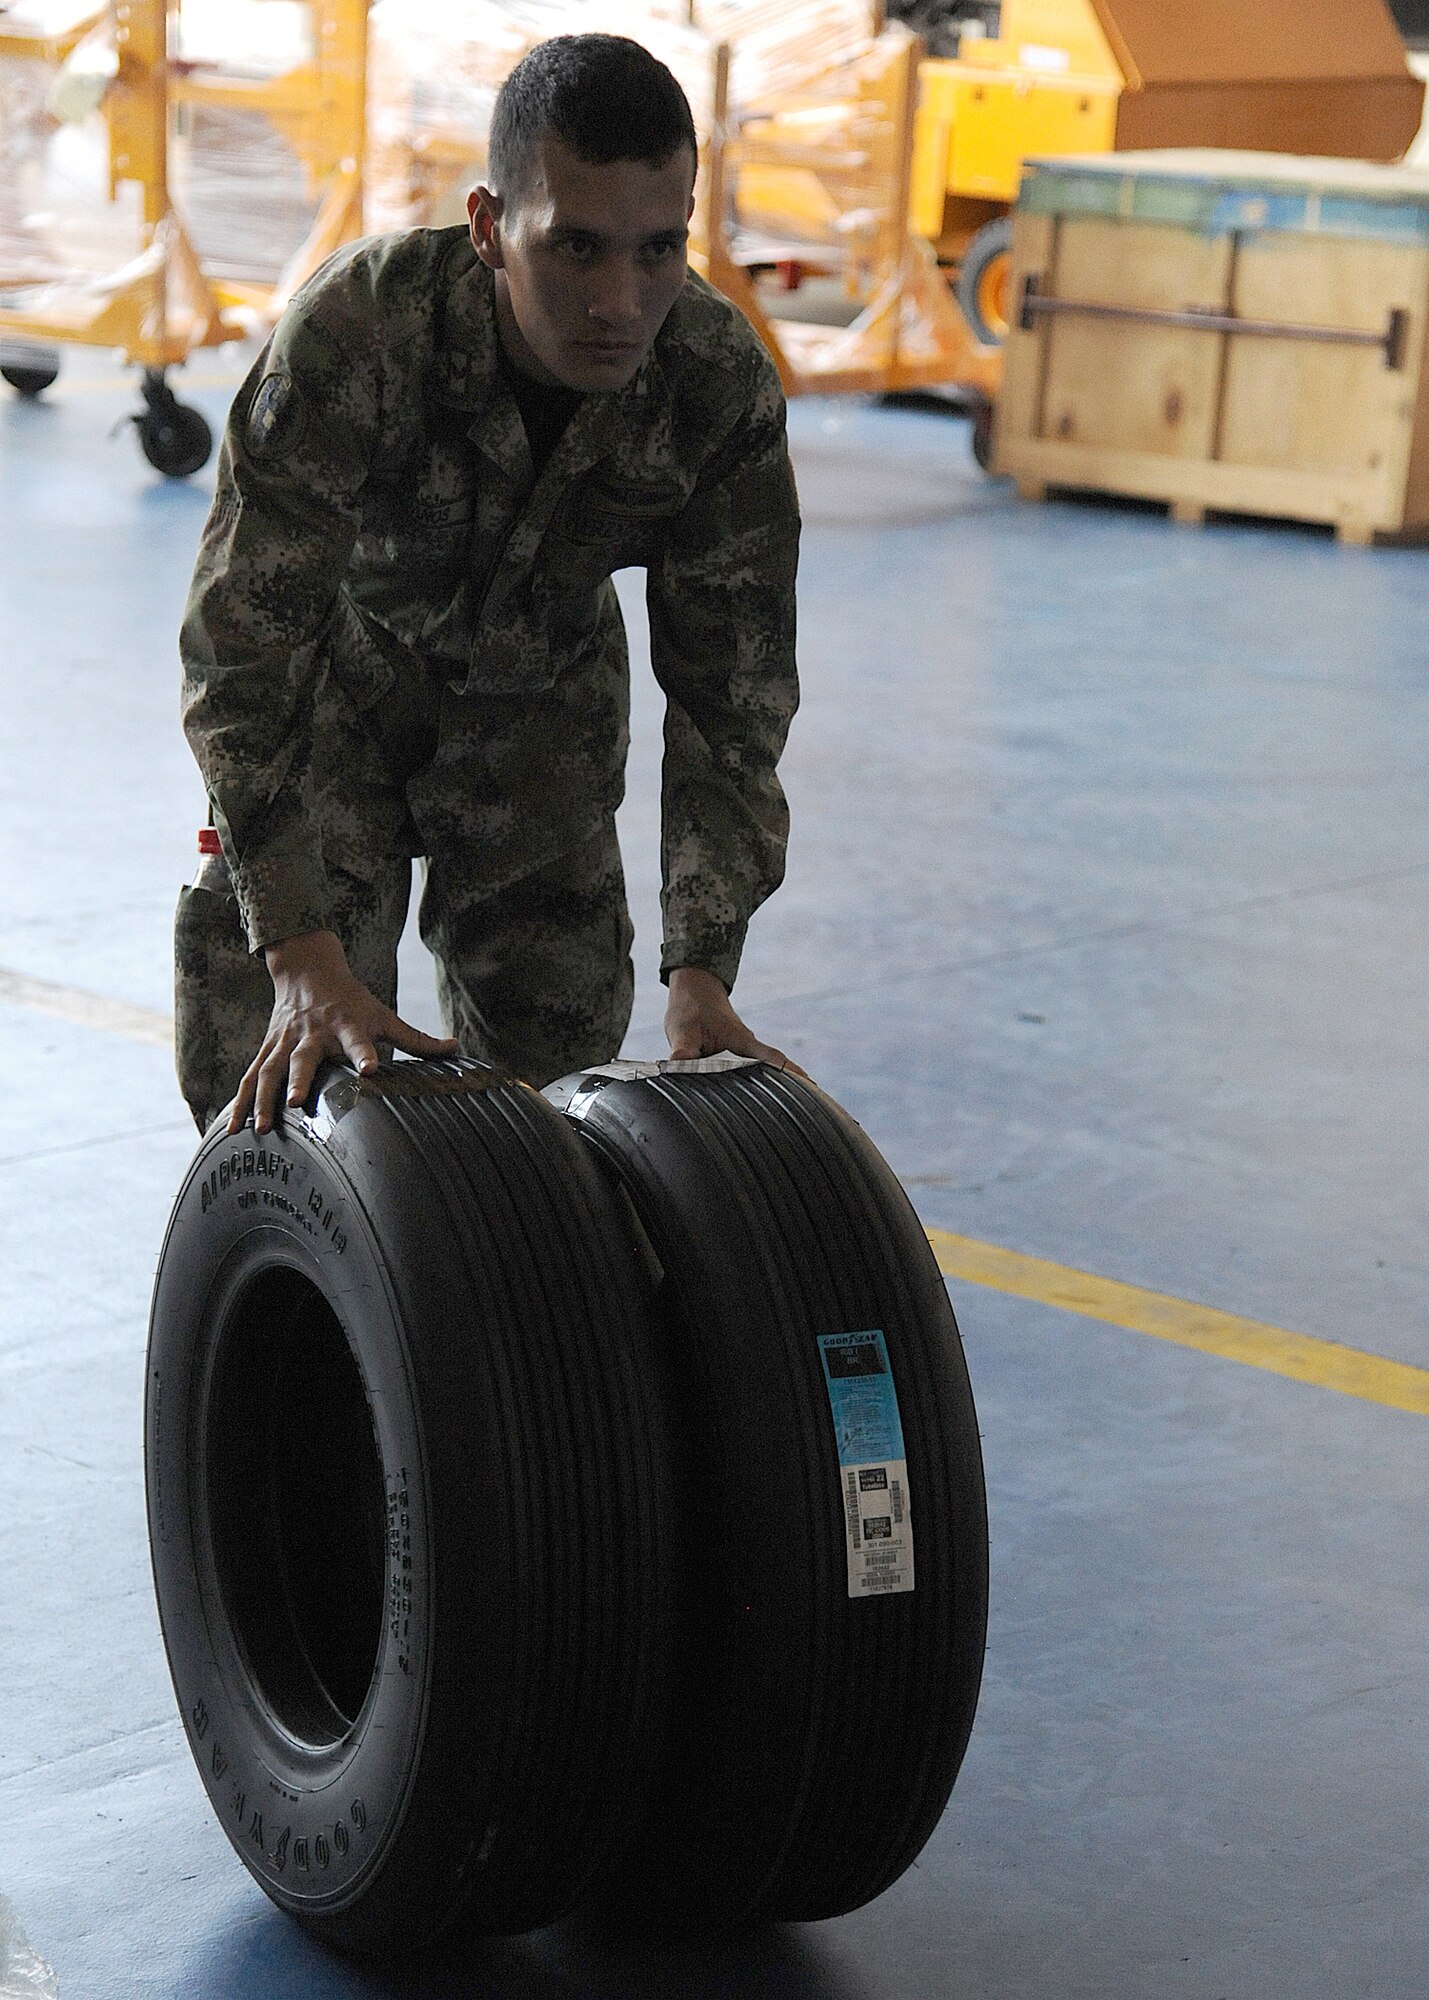 A Colombian air force member moves aircraft tires for palletizing during an Air Mobility Command Building Partner Capacity mission at General Alberto Pauwels Rodriguez Air Base in Barranquilla, Colombia, June 27.  (U.S. Air Force photo by Tech. Sgt. Lesley Waters)